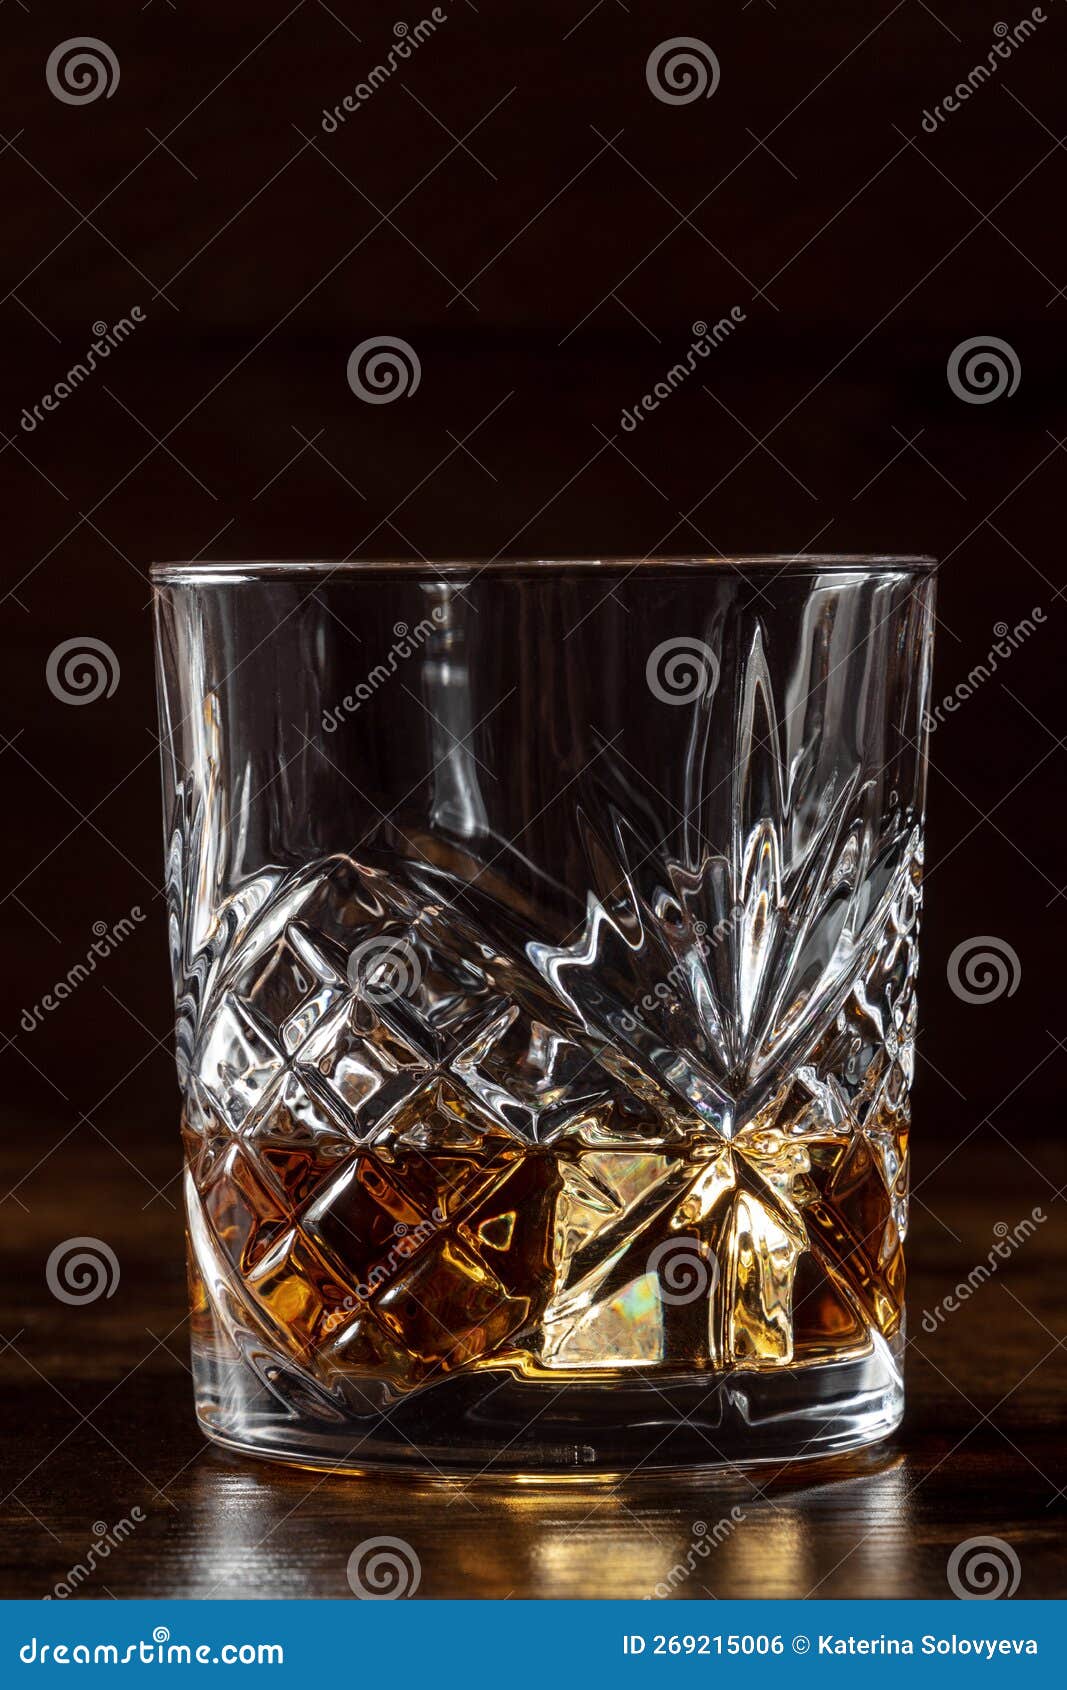 whiskey in a glass with ice. bourbon whisky on rocks on a dark background